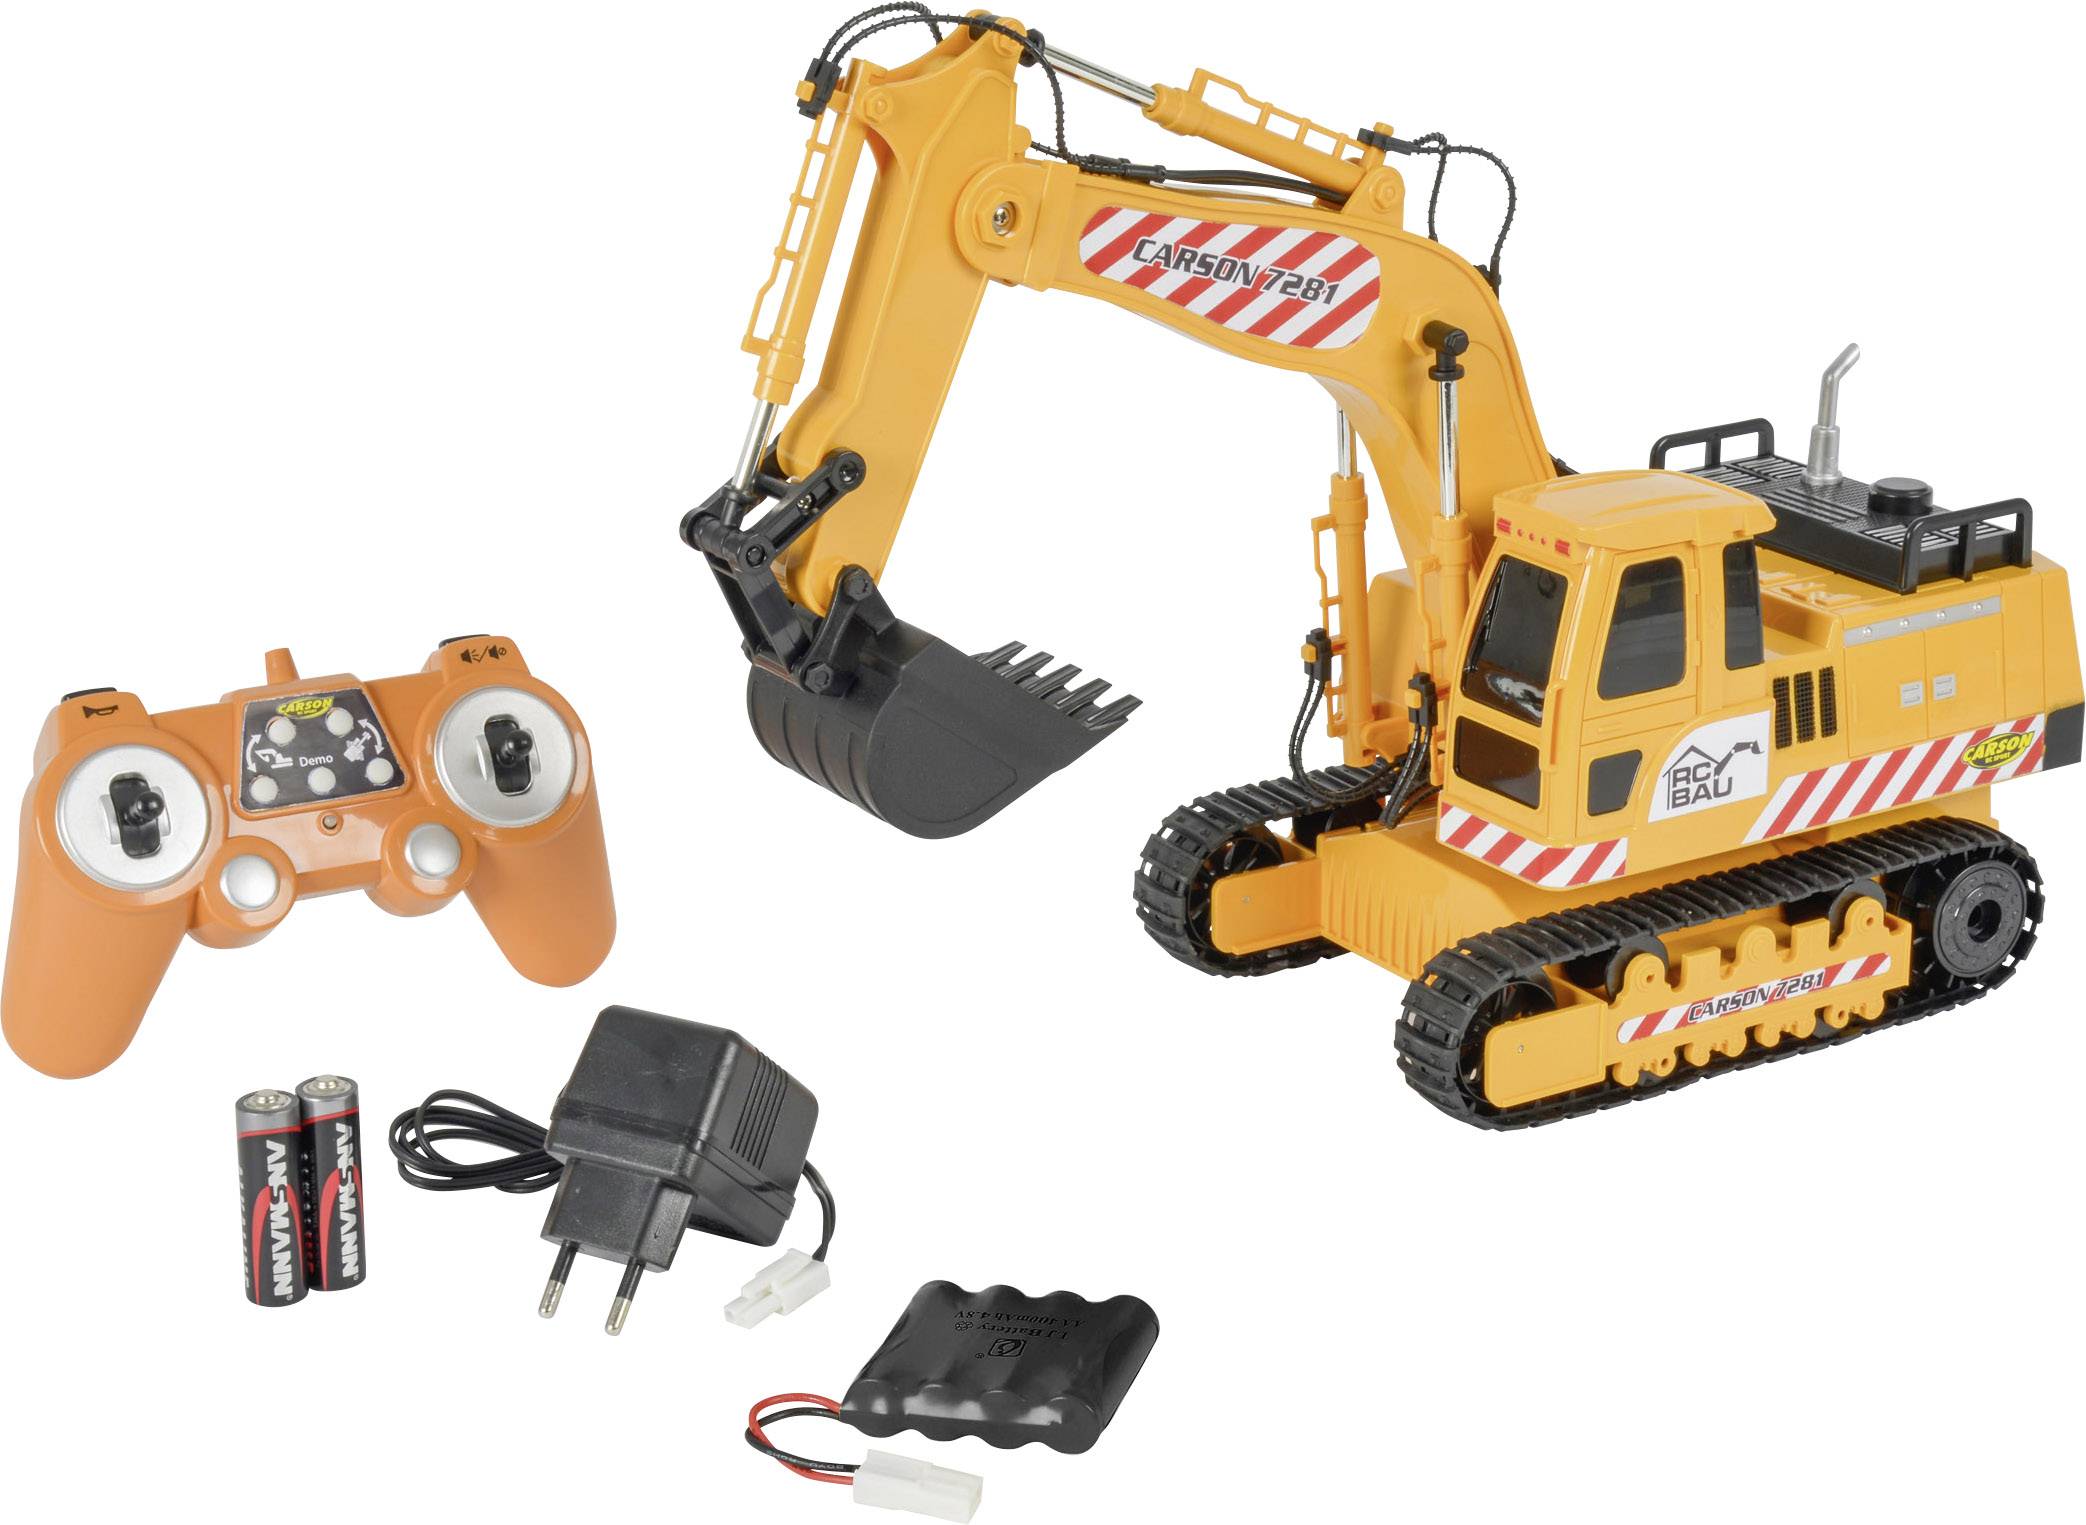 Carson RC Sport Crawler excavator 1:20 RC scale model for beginners ...